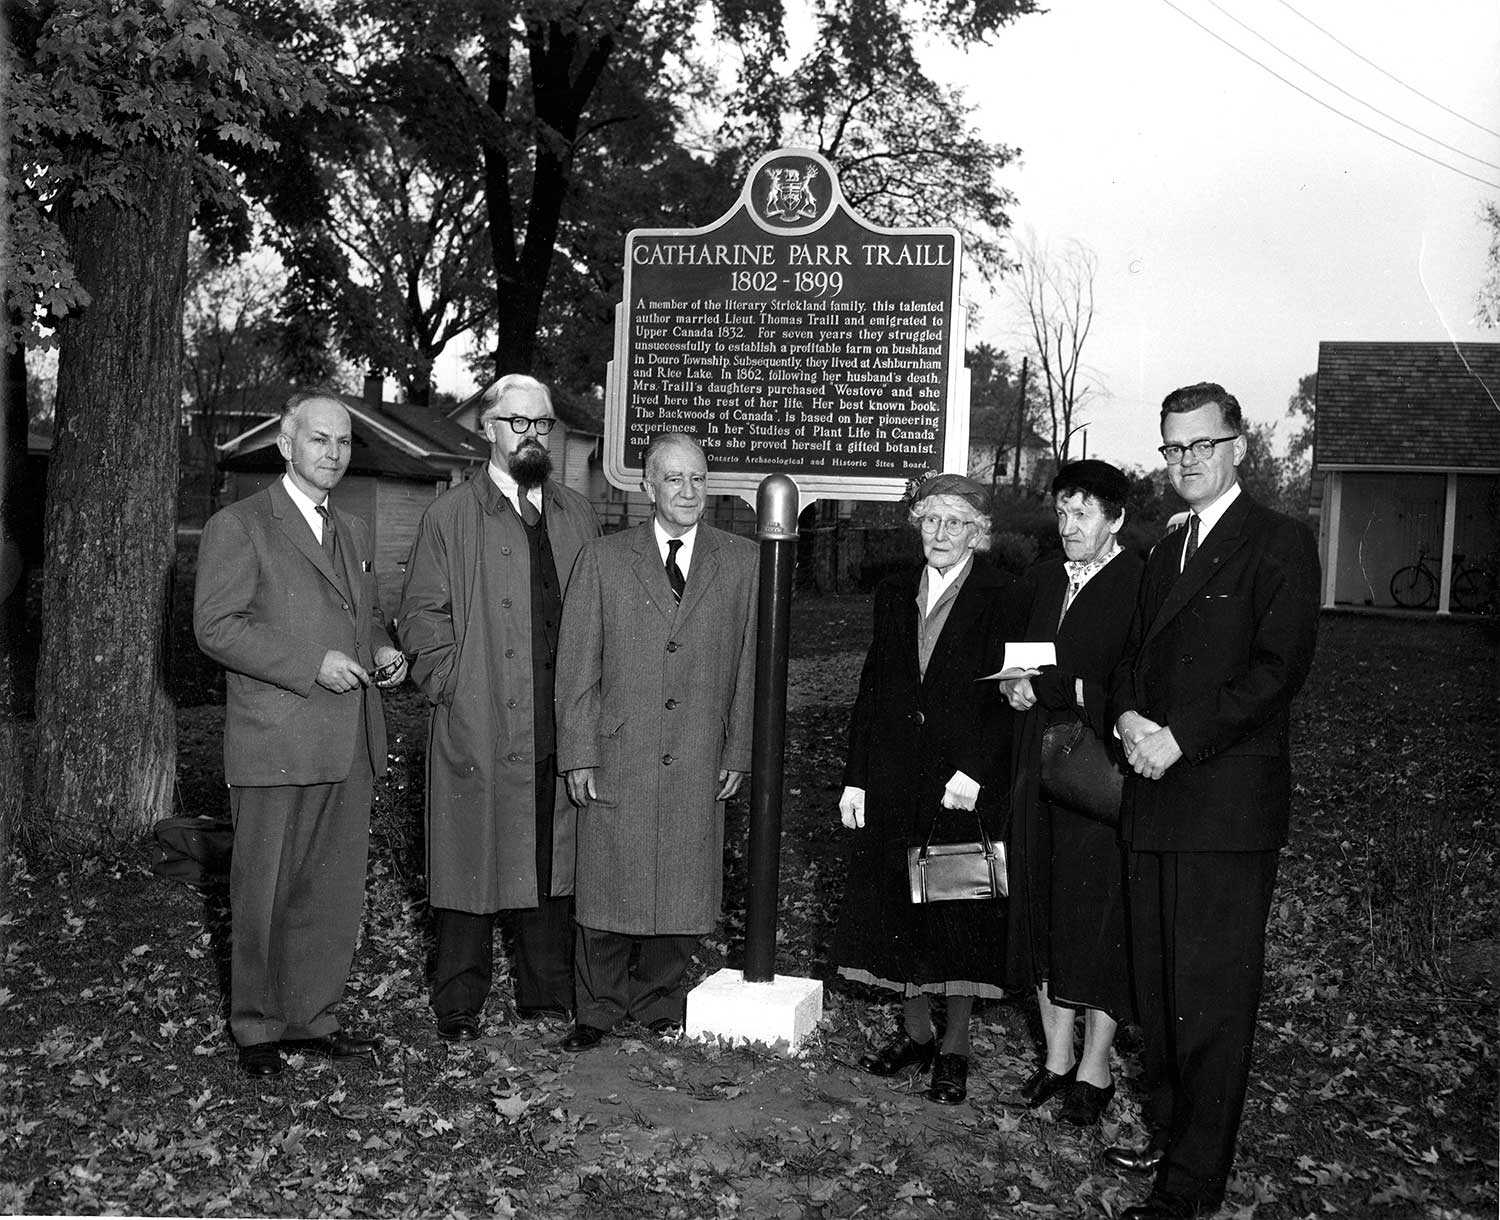 This 1958 provincial plaque unveiling to commemorate Catharine Parr Traill was attended by Mrs. Anne Atwood and Miss Anne Traill, the author’s granddaughters. Also in attendance (shown here second from left) was the then-editor of the Peterborough Examiner – Robertson Davies – who, in time, became a literary giant in his own right.